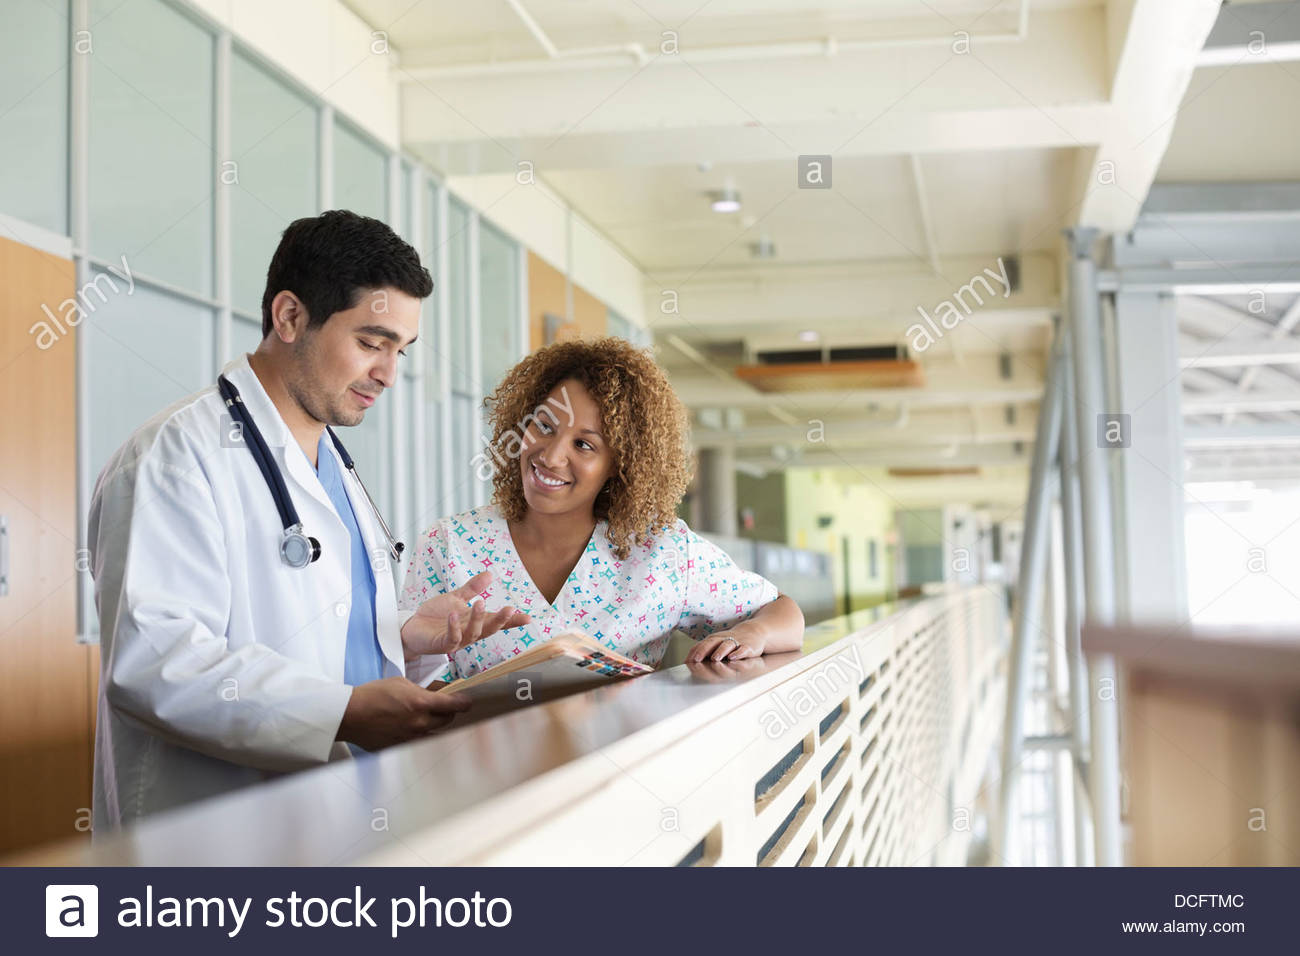 Medical professionals discussing patient information Stock Photo